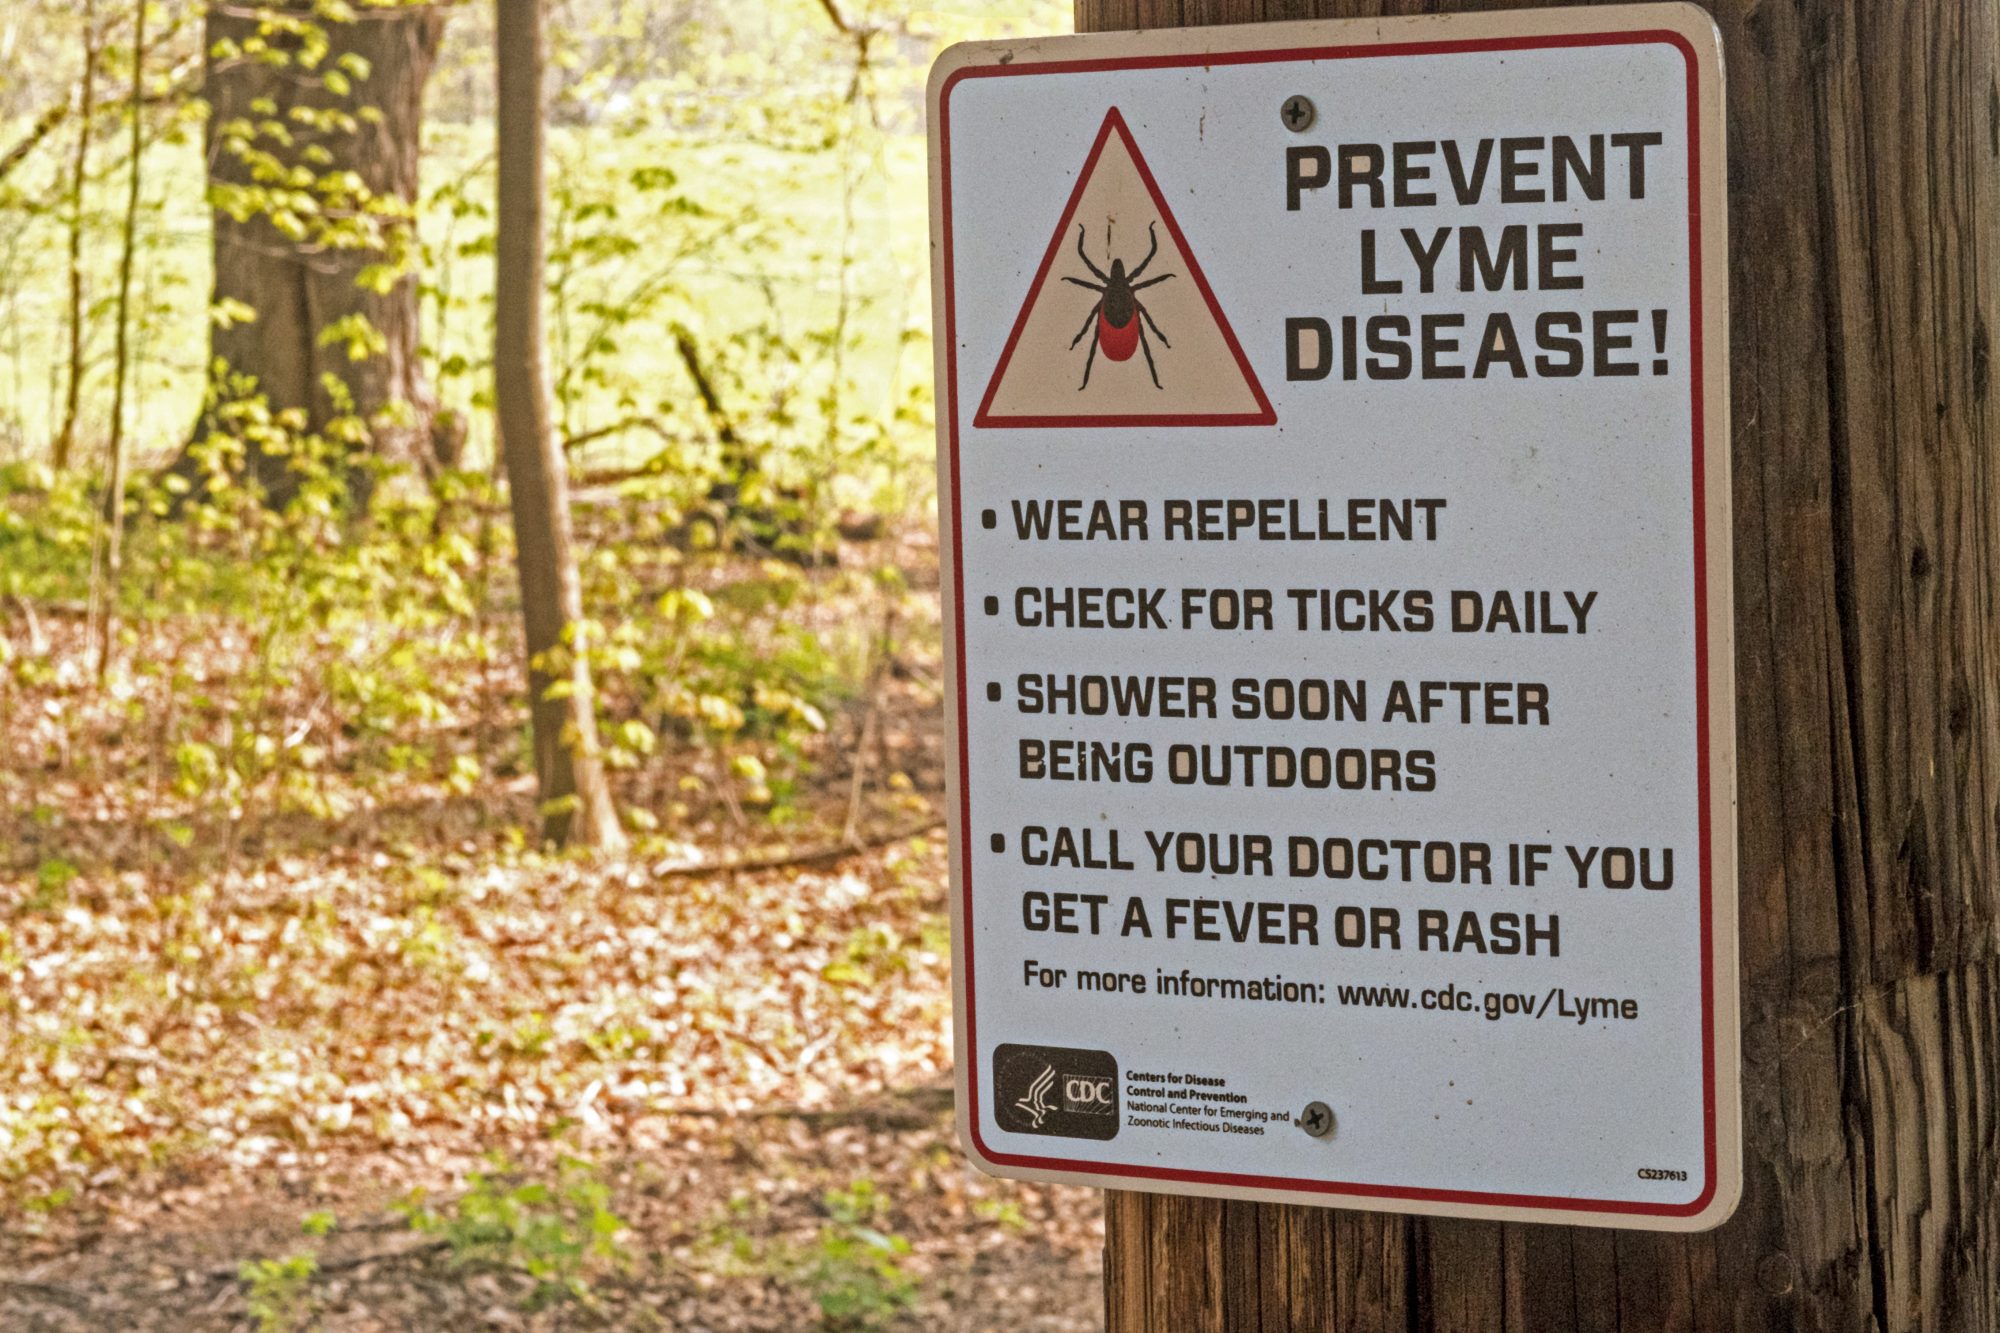 Sign in wooded area reading 'PREVENT LYME DISEASE'